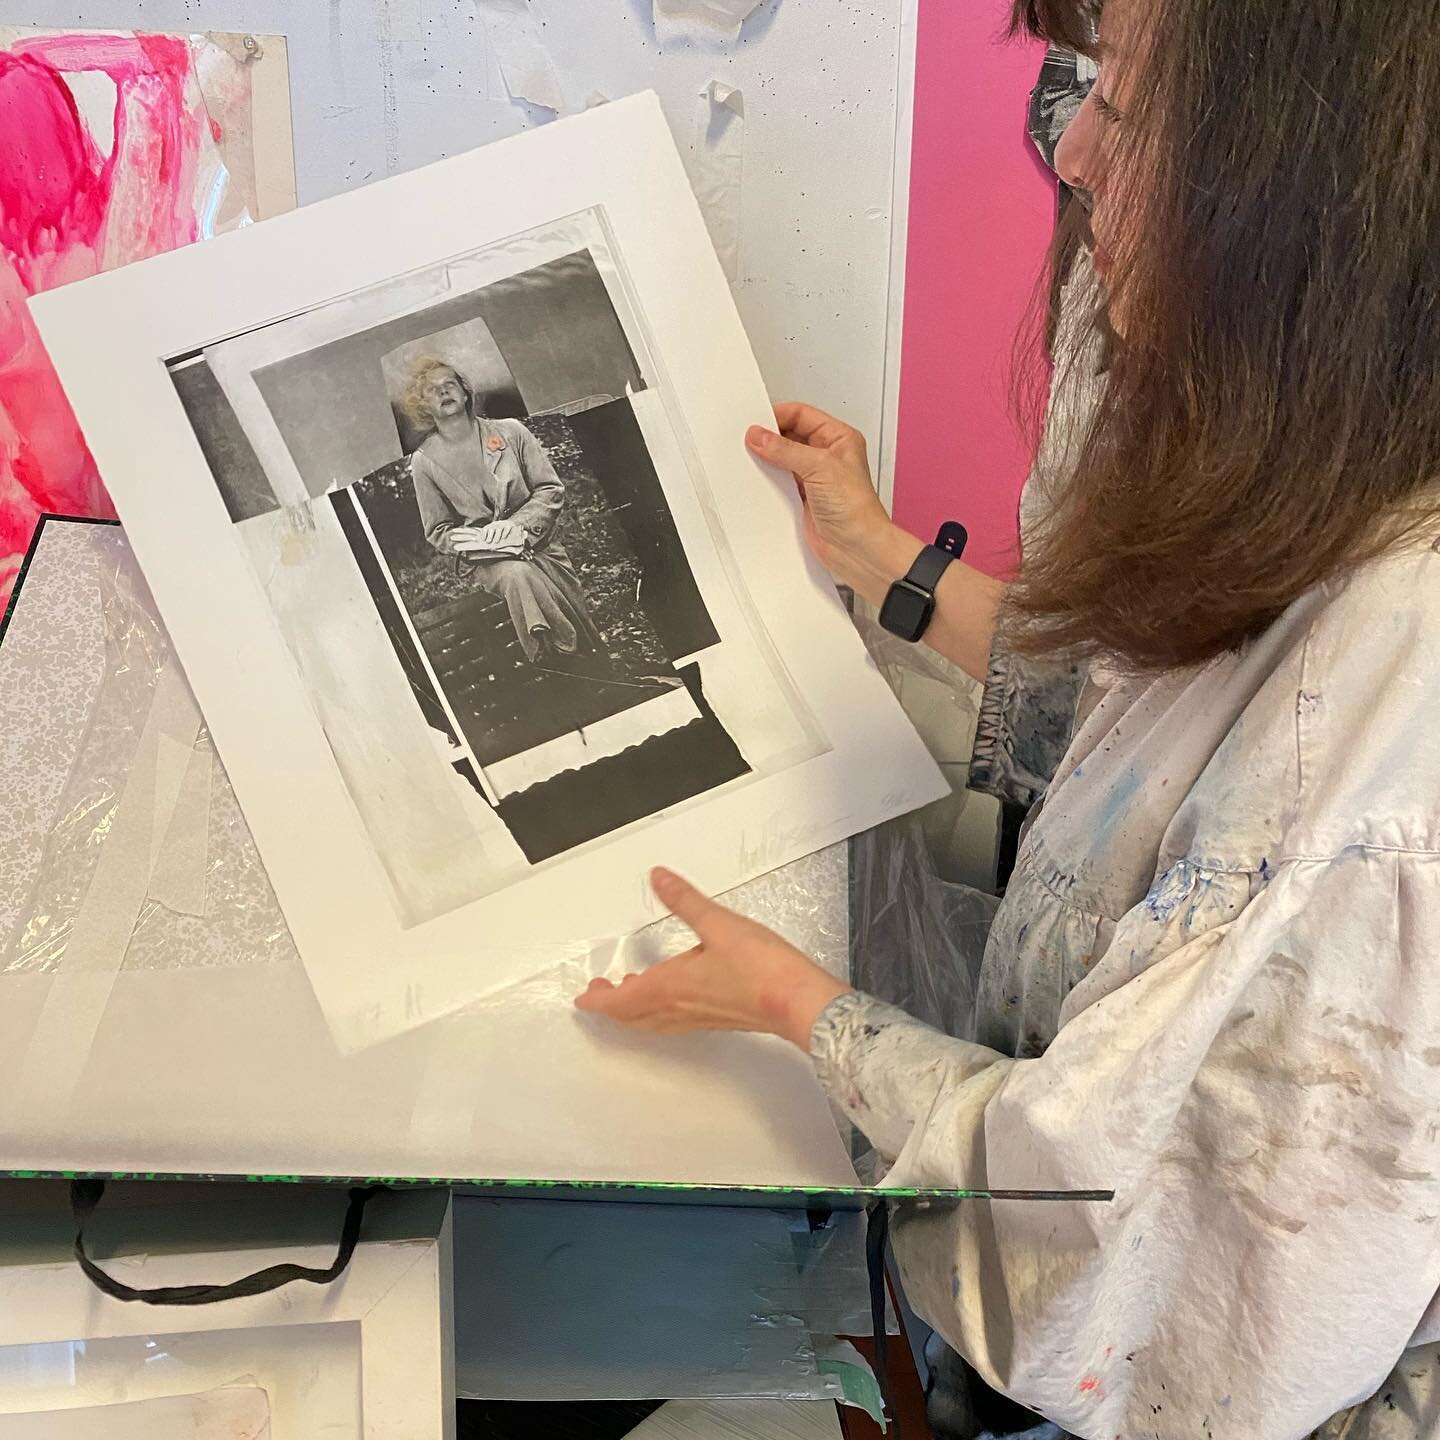 Angela Grossmann&rsquo;s print in the 2021 Edition - each unique in its final details. Check out our website for the other six prints included in the limited Edition of the 2021 Portfolio Prize. 

#portfolioprize #angelagrossmann #studiovisit